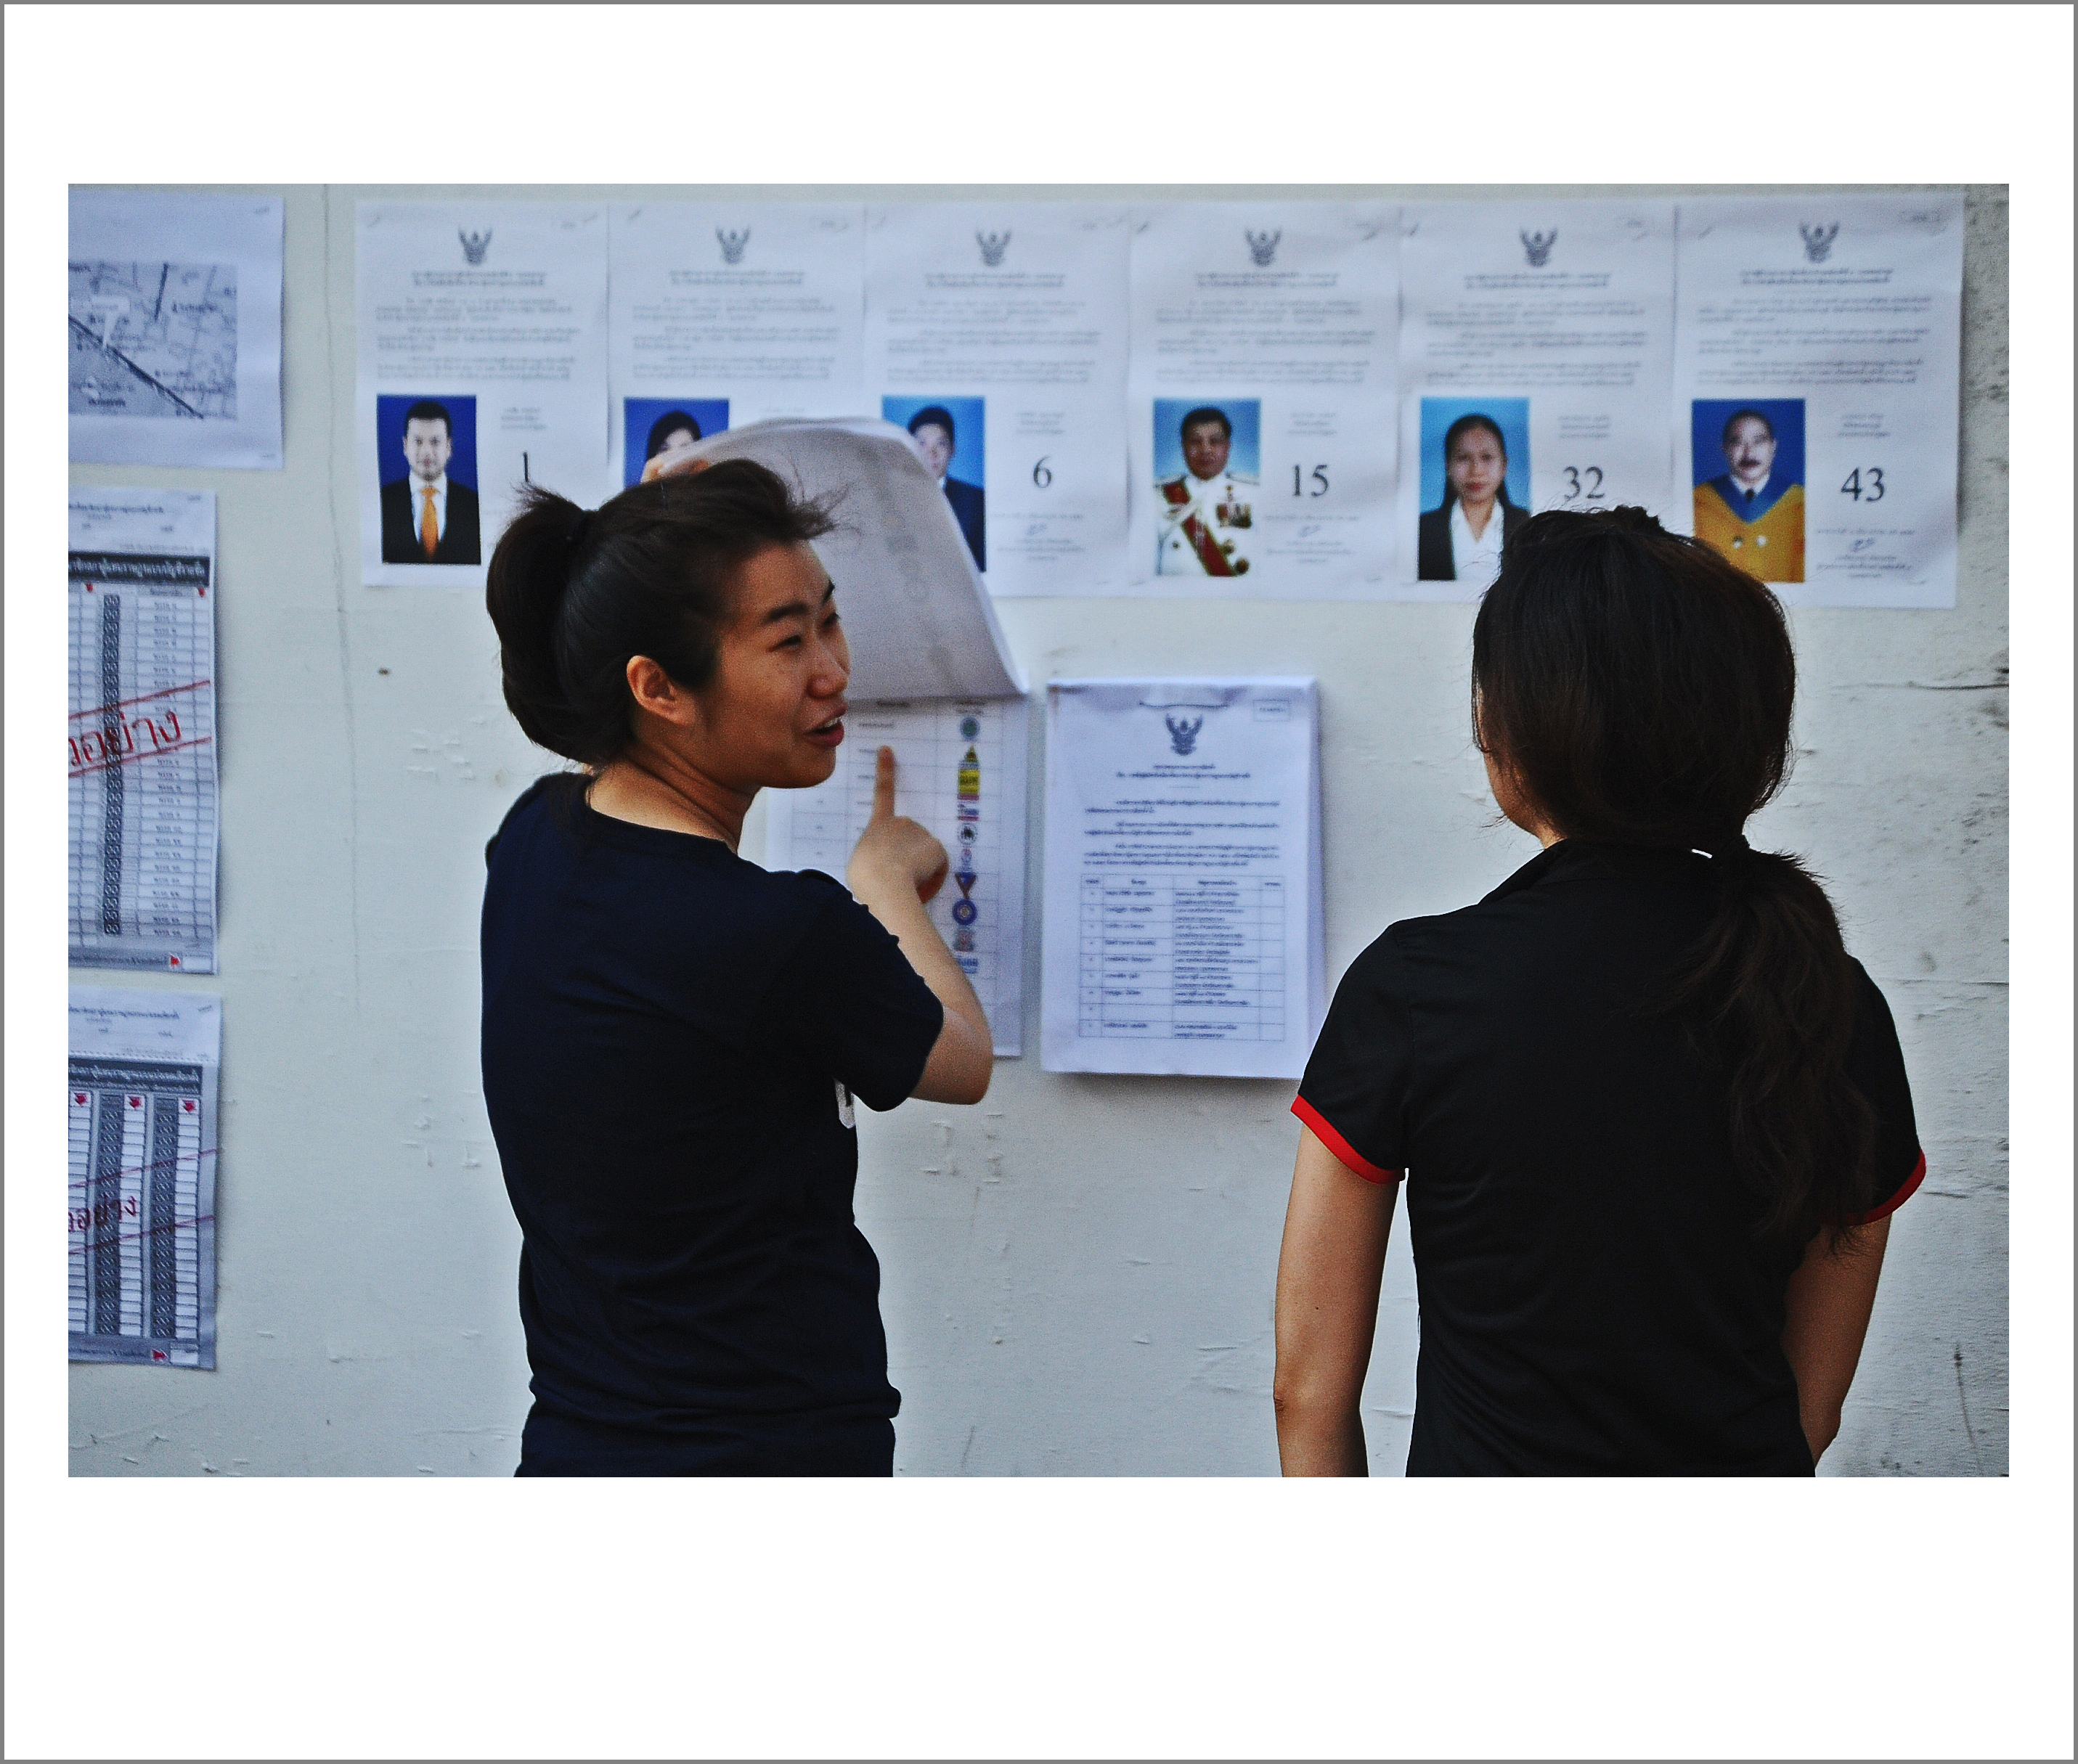 Voters at a polling station during Thailand's 2014 General Election. Source: Flikr, Creative Commons